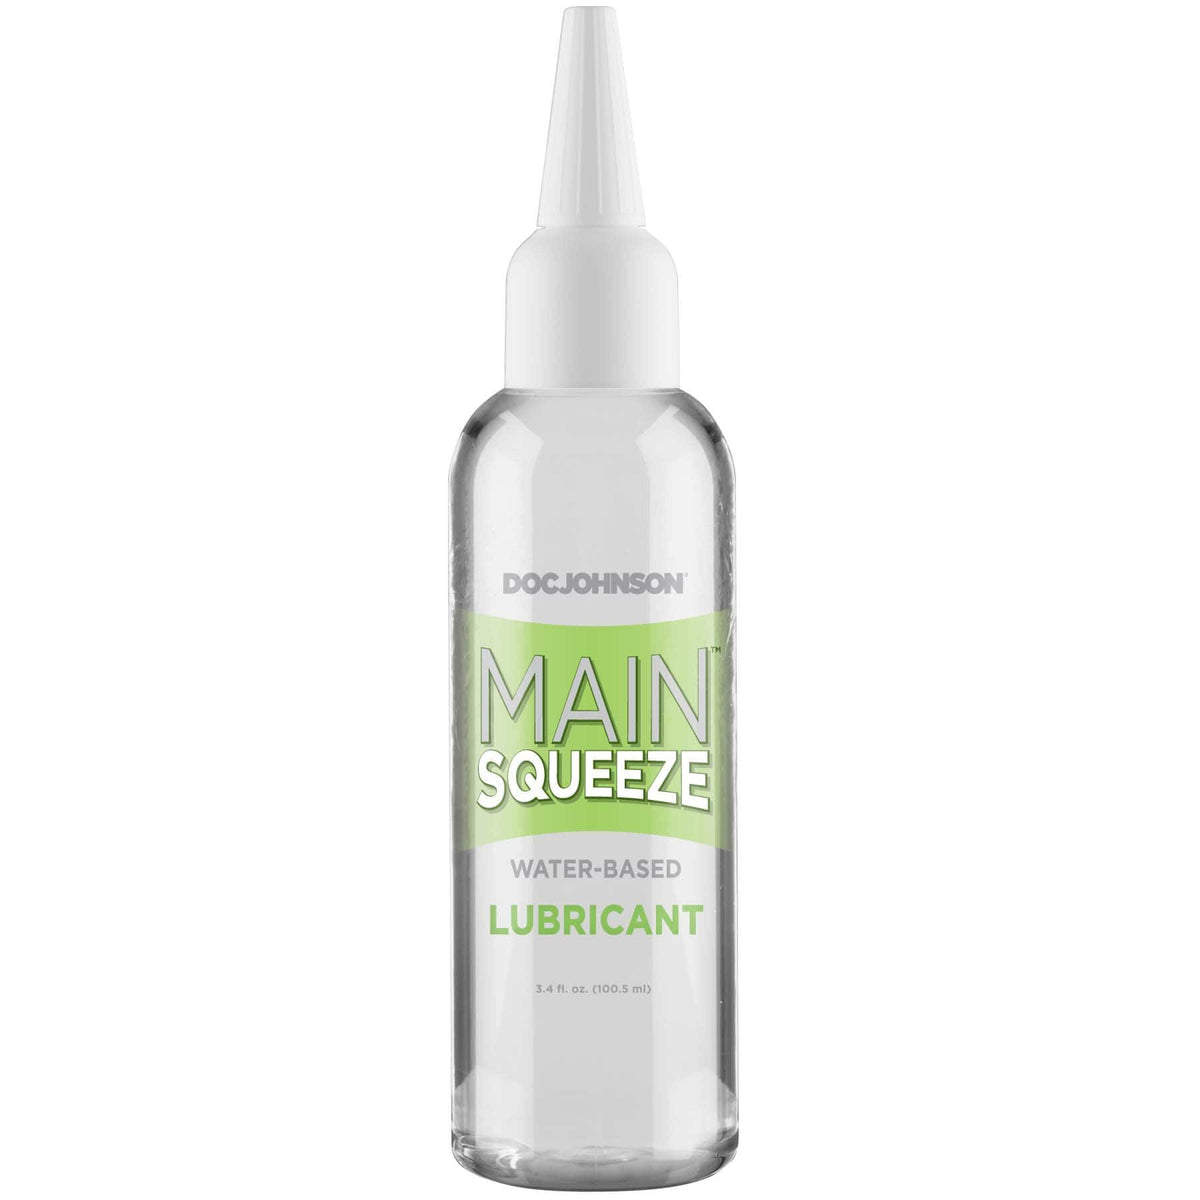 main squeeze water based 3 4 fl oz